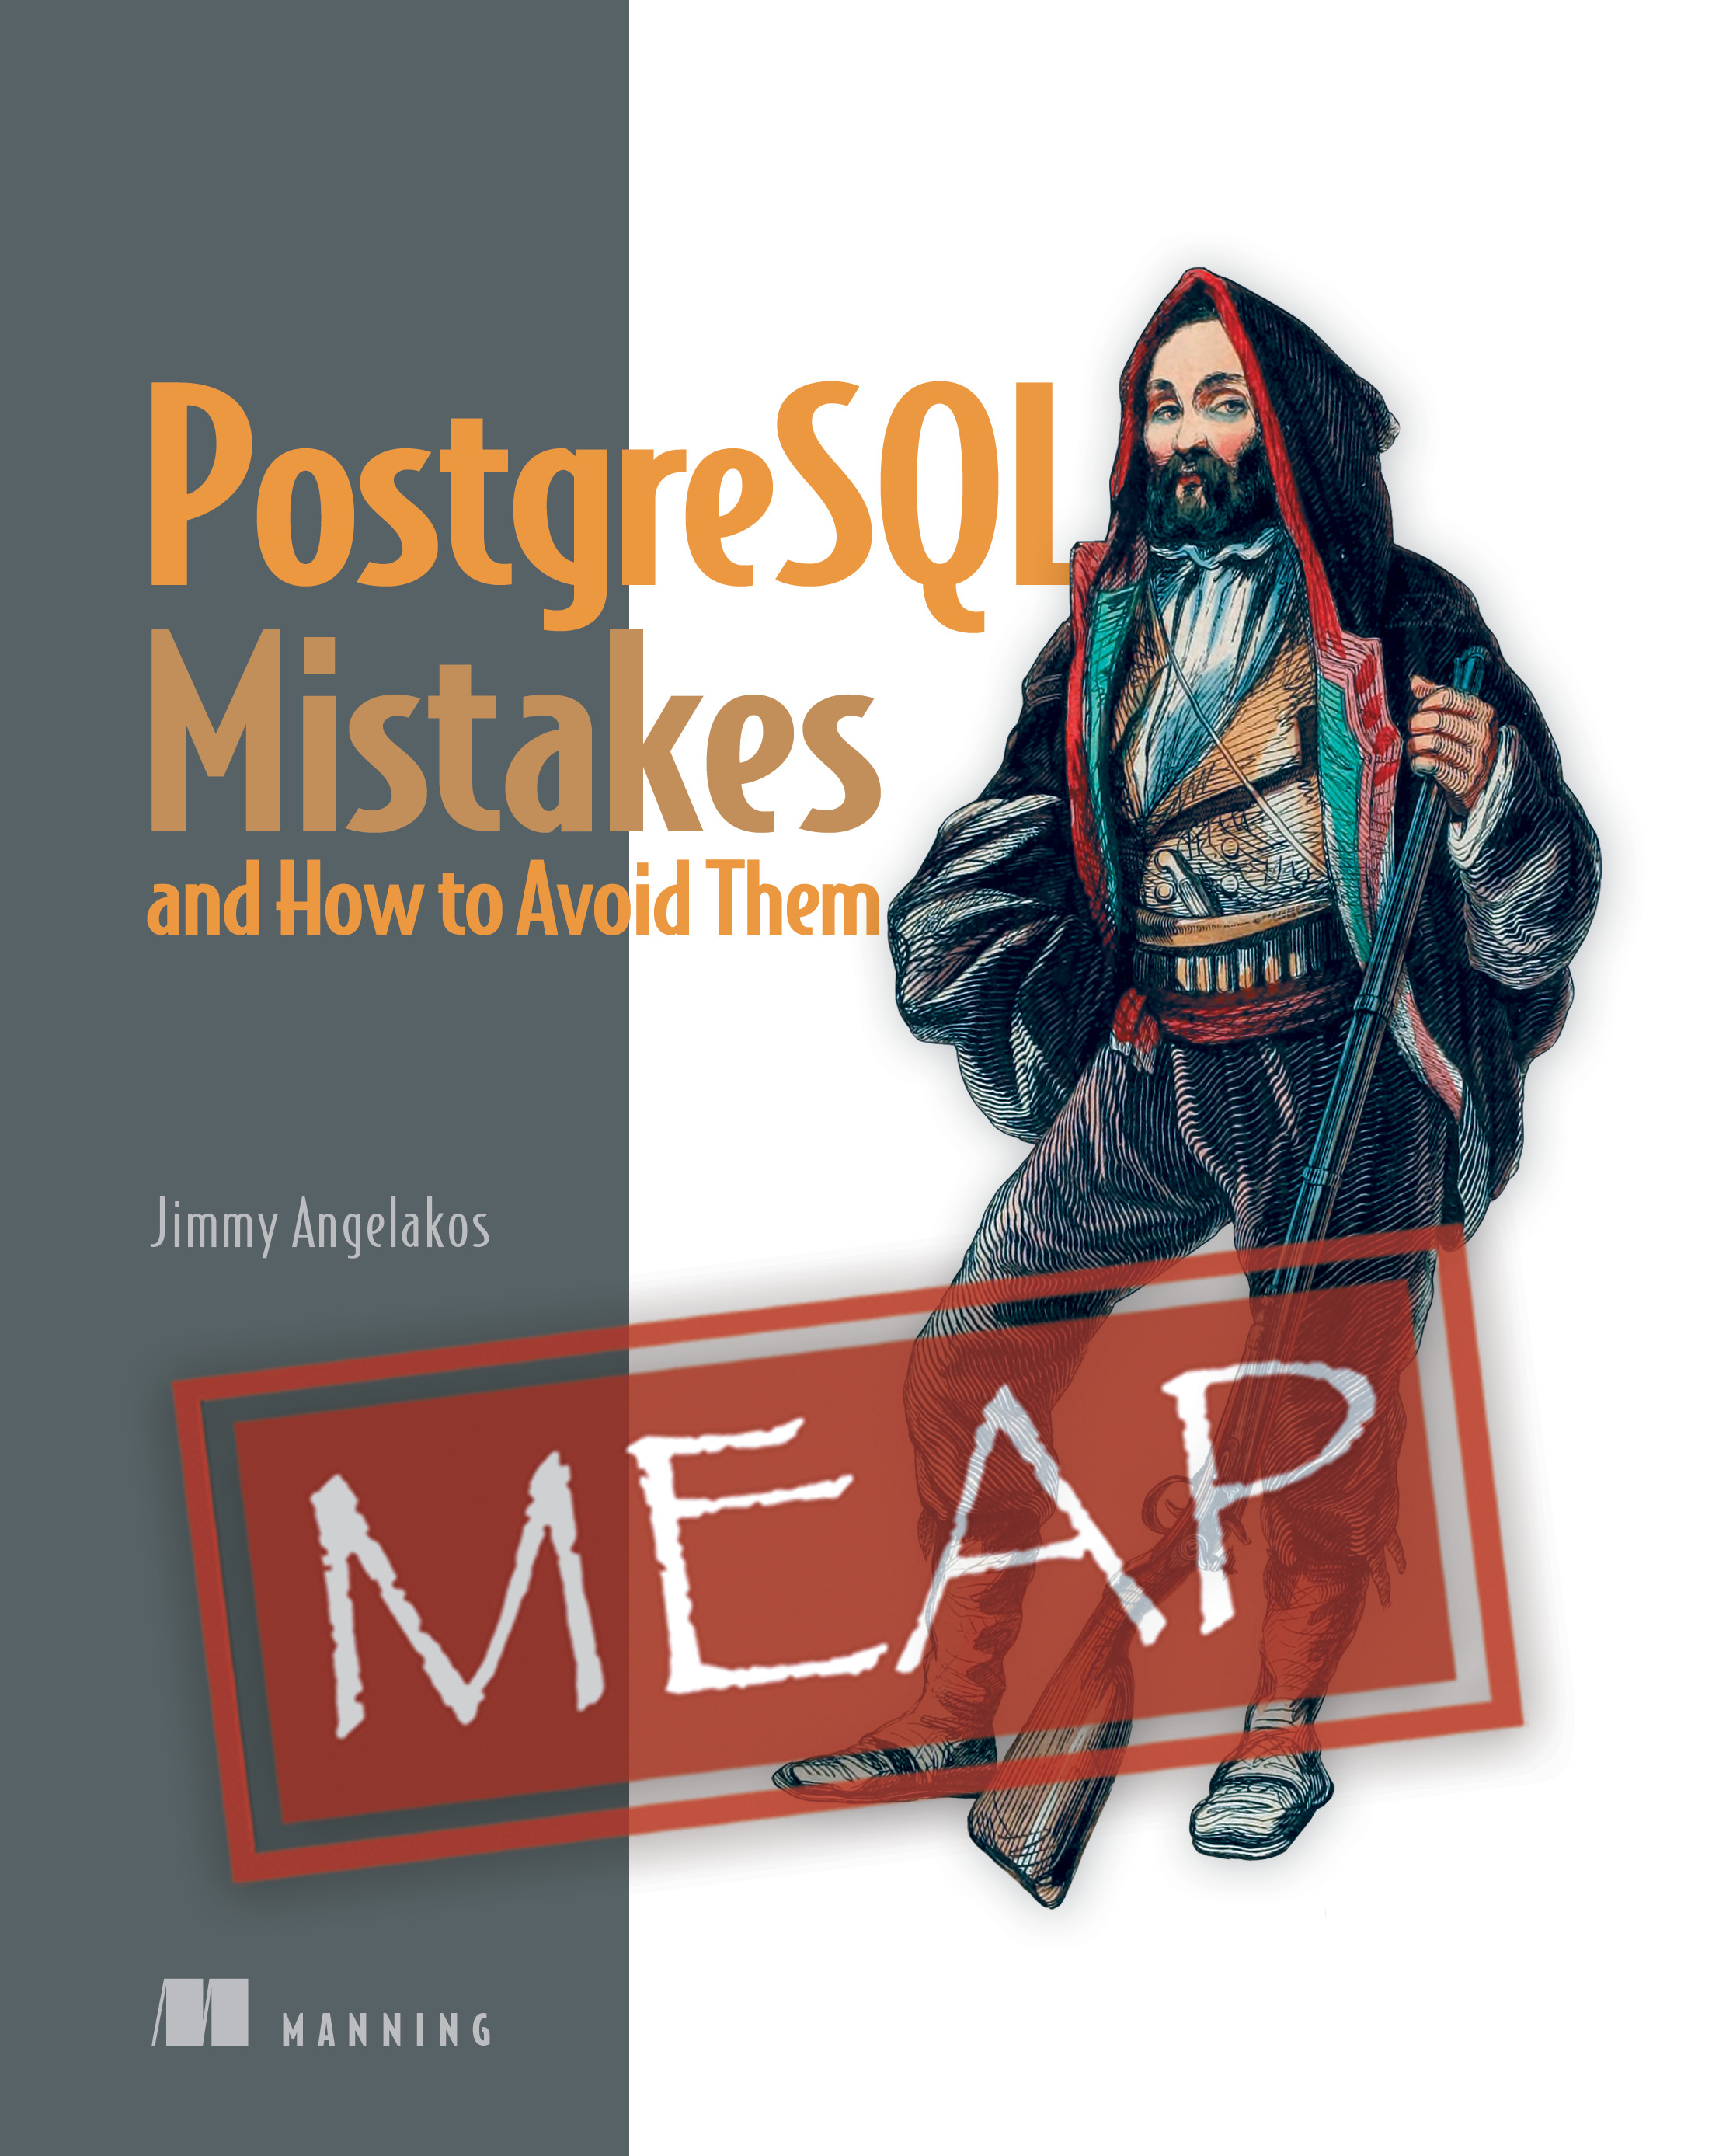 PostgreSQL Mistakes and How to Avoid Them